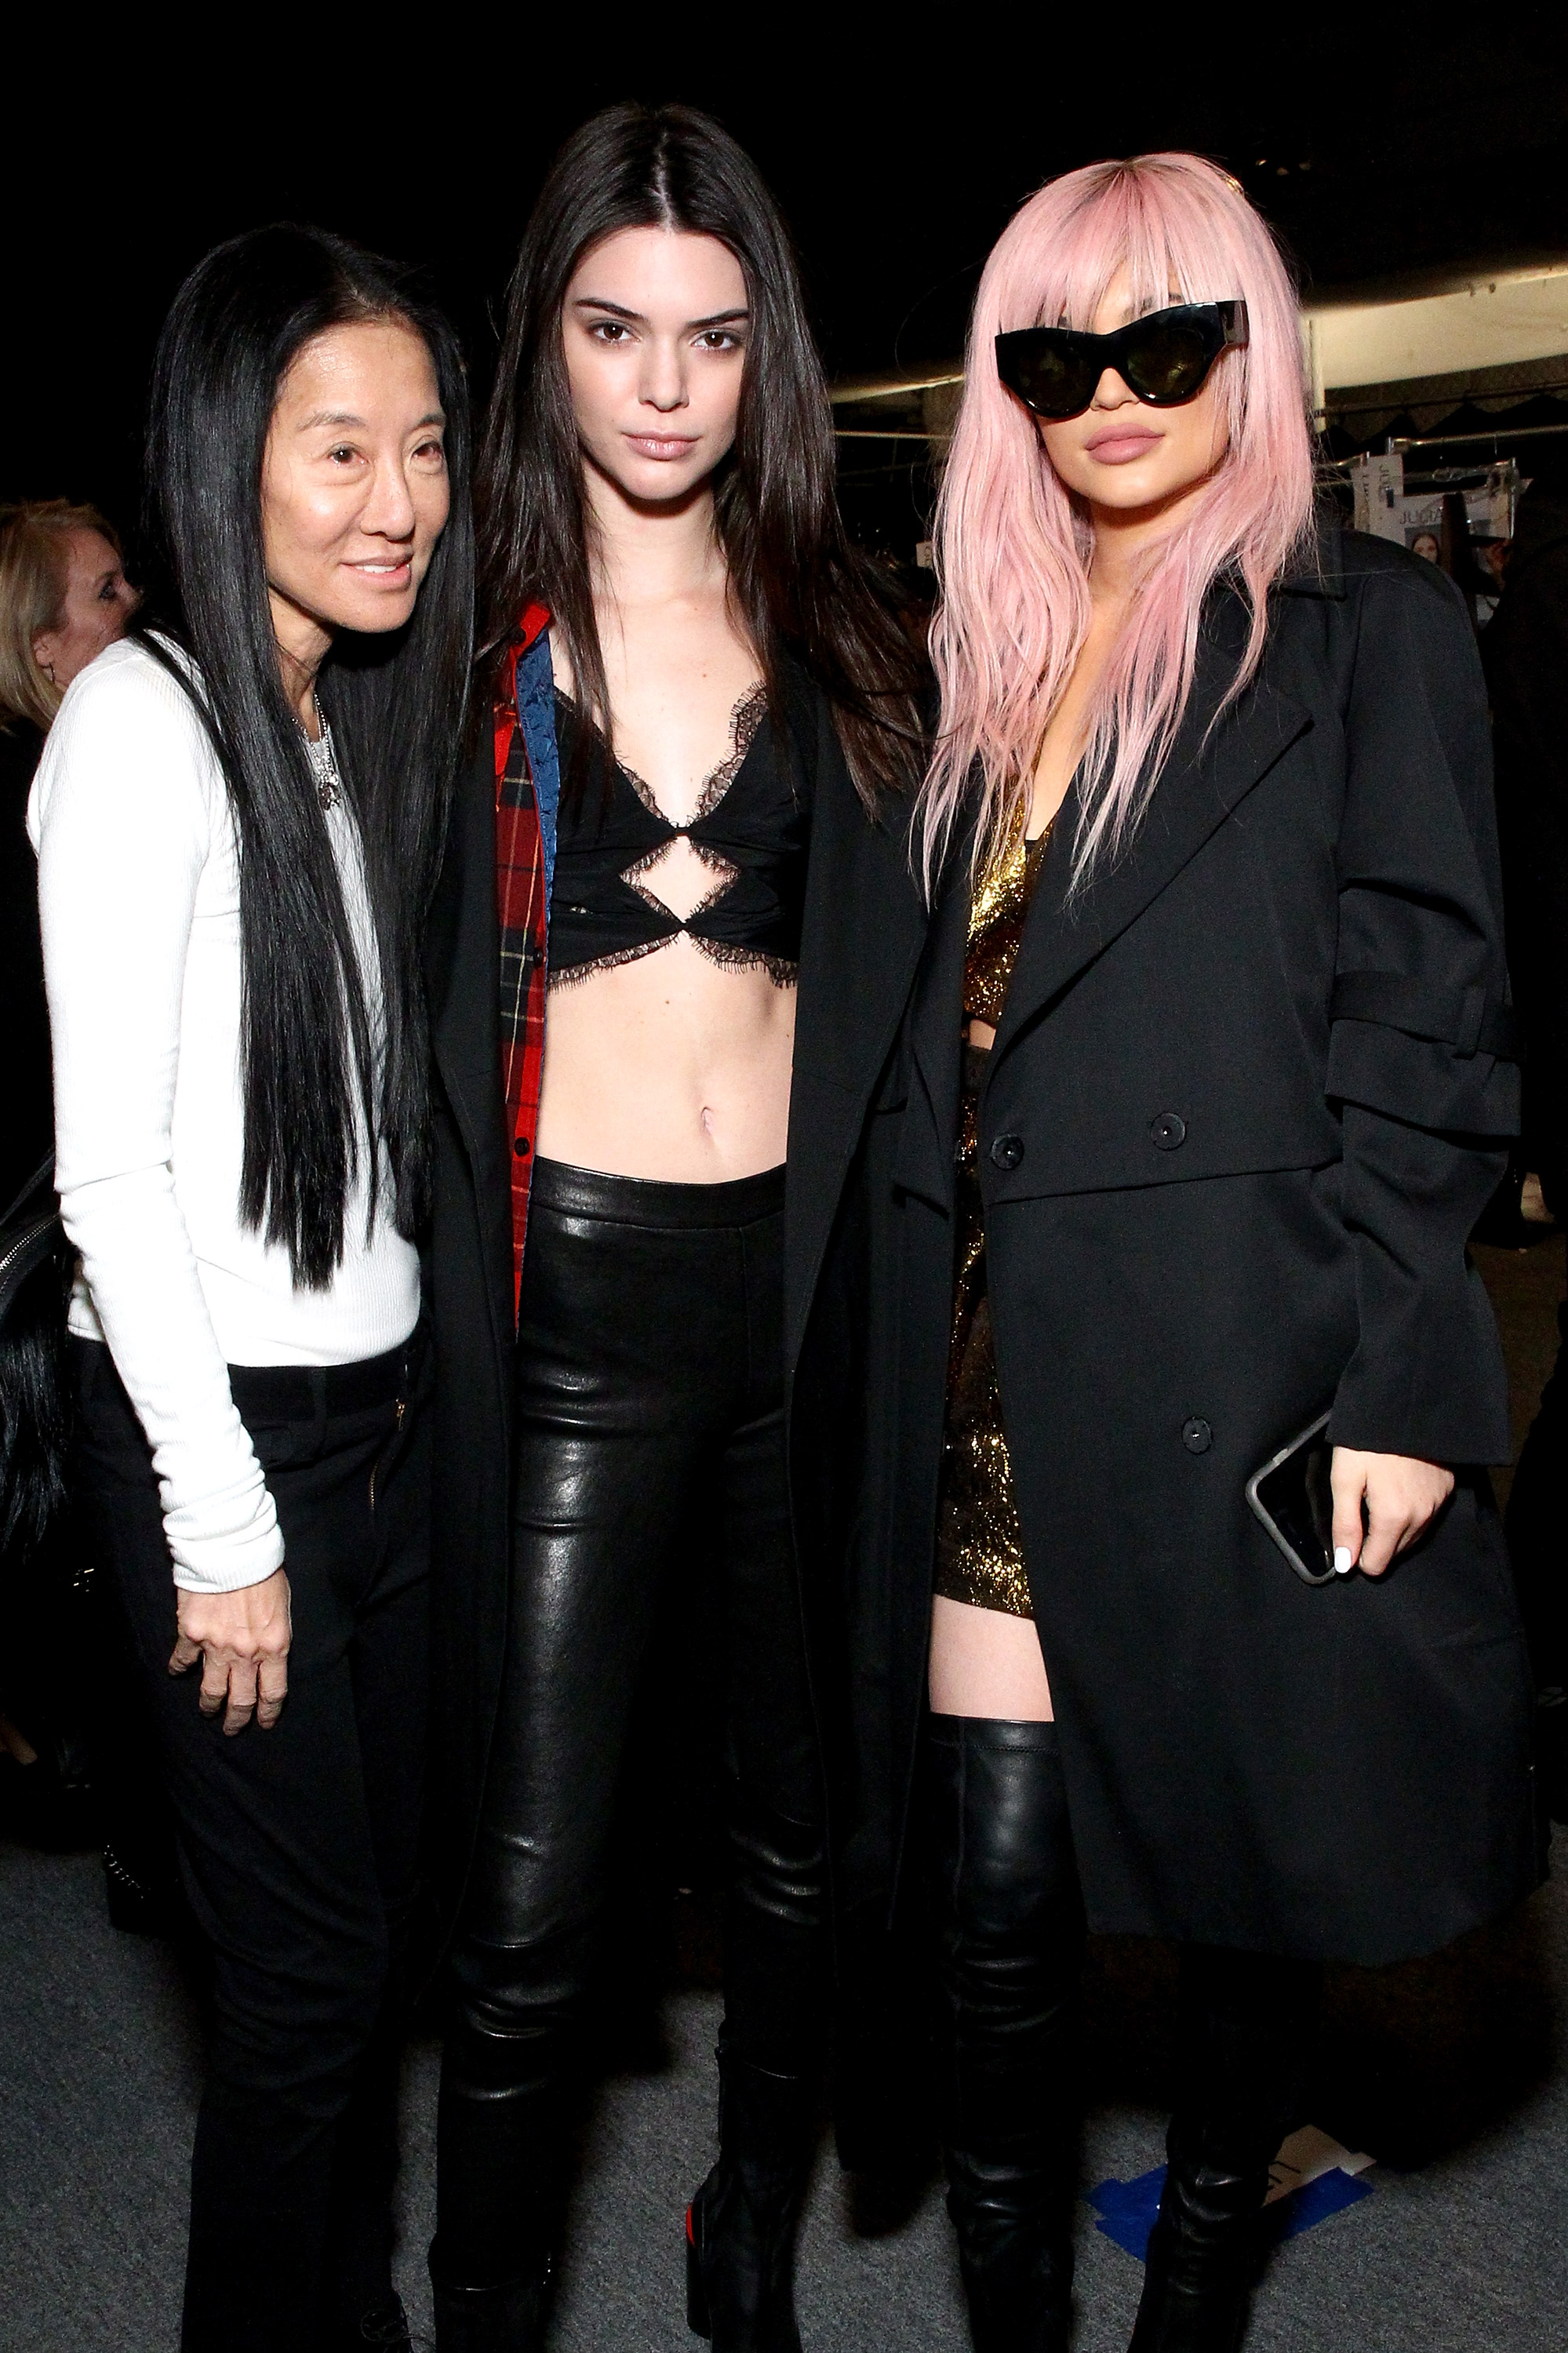 NEW YORK, NY - FEBRUARY 16: Designer Vera Wang, Kendall Jenner, and Kylie Jenner pose backstage at the Vera Wang Collection Fall 2016 fashion show during New York Fashion Week: The Shows at The Arc, Skylight at Moynihan Station on February 16, 2016 in New York City. (Photo by Astrid Stawiarz/Getty Images for NYFW: The Shows)